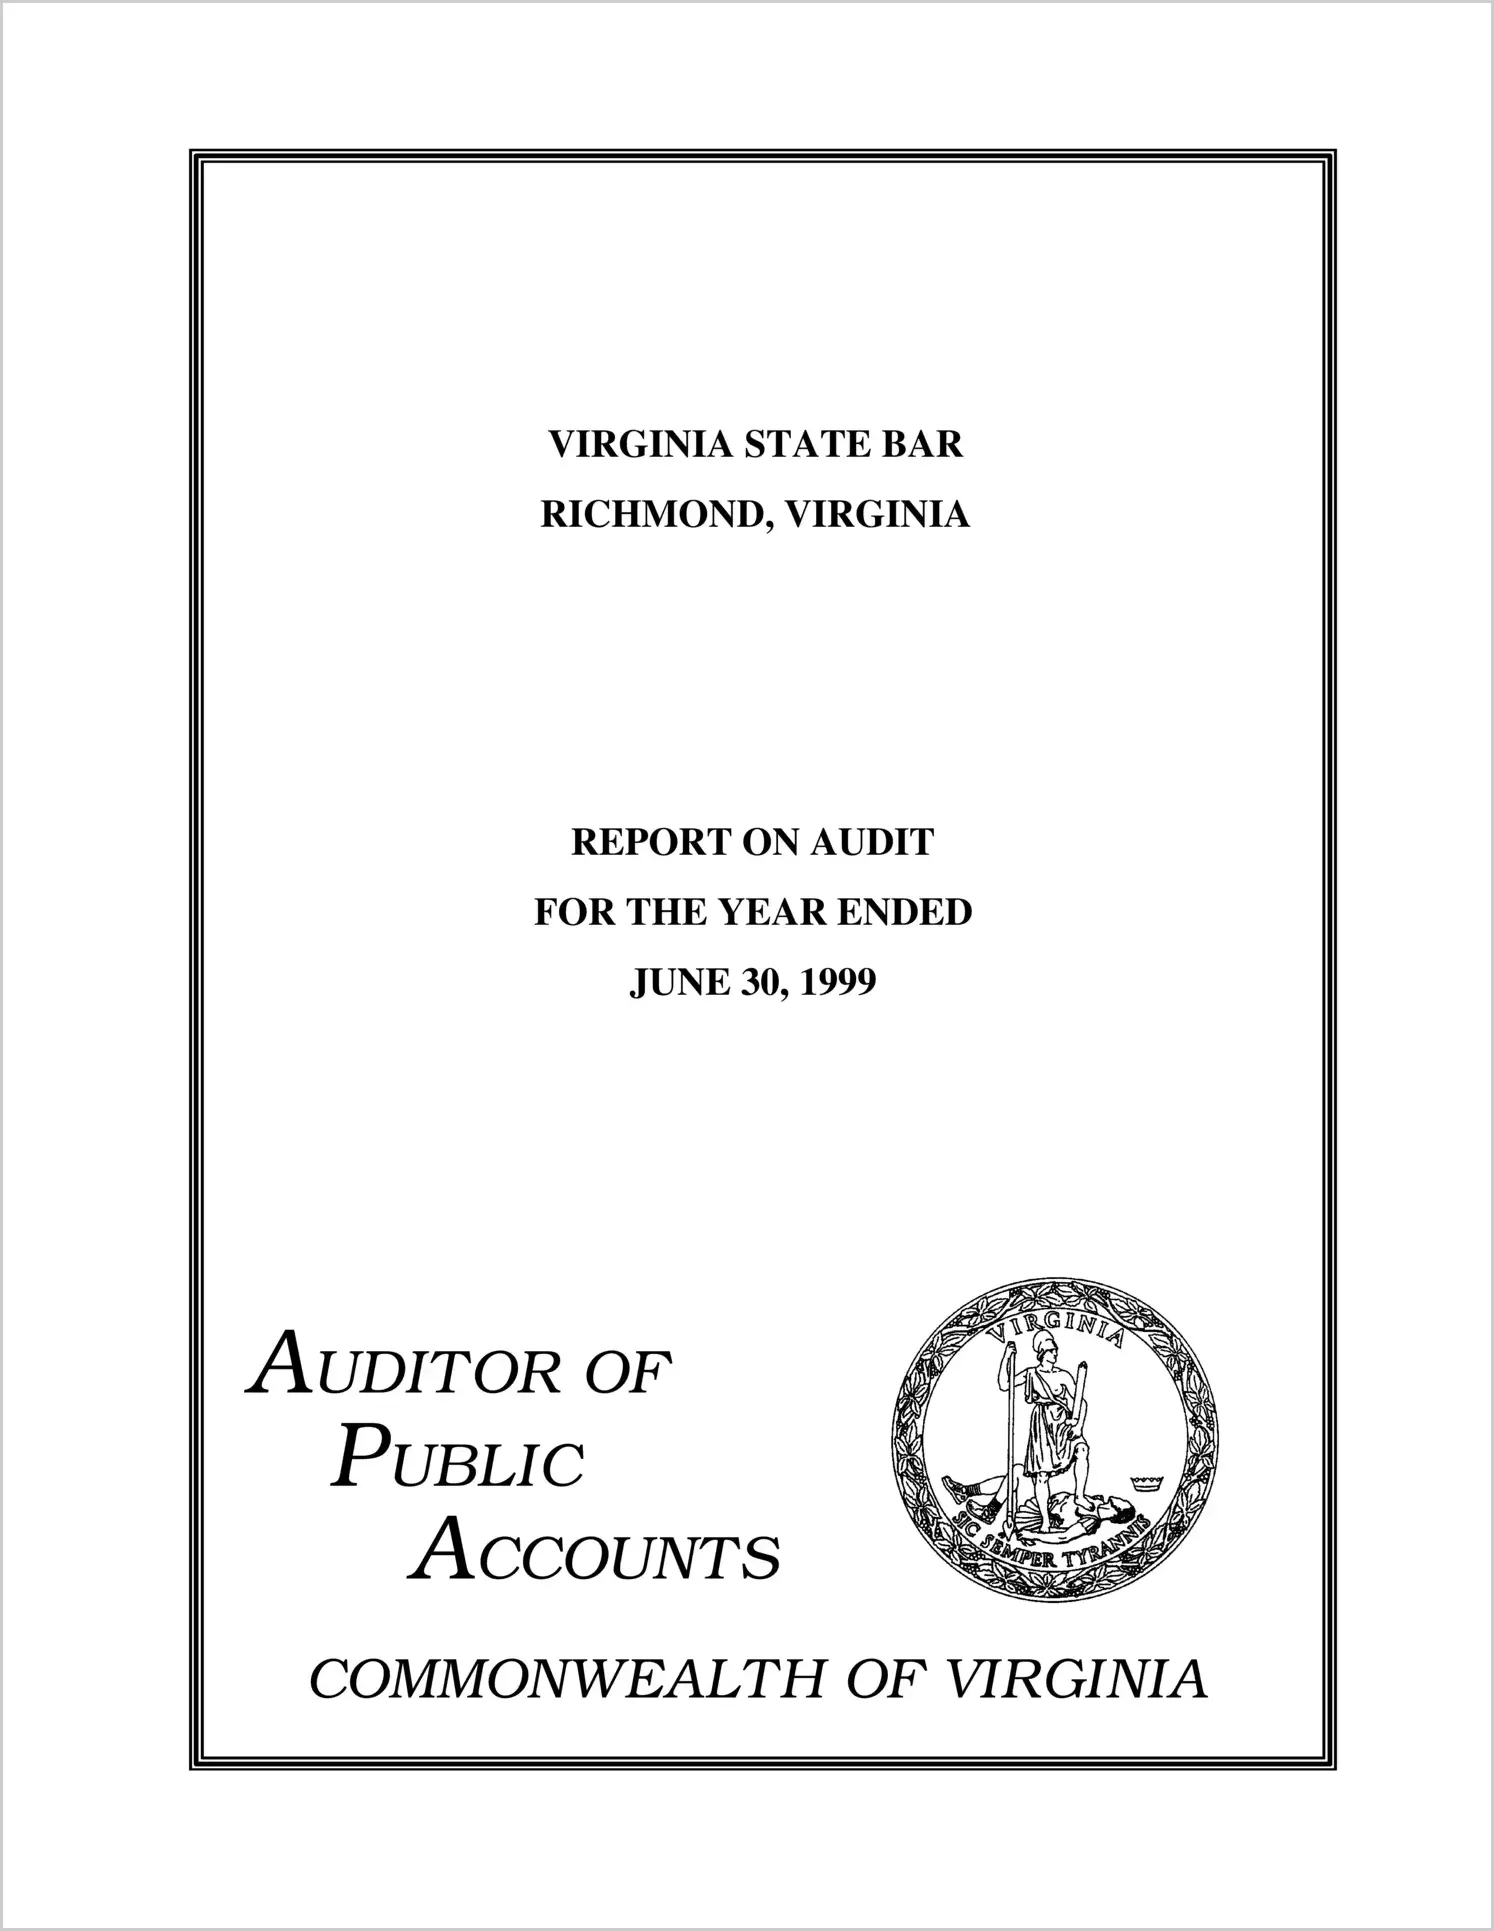 Virginia State Bar for the year ended June 30, 1999